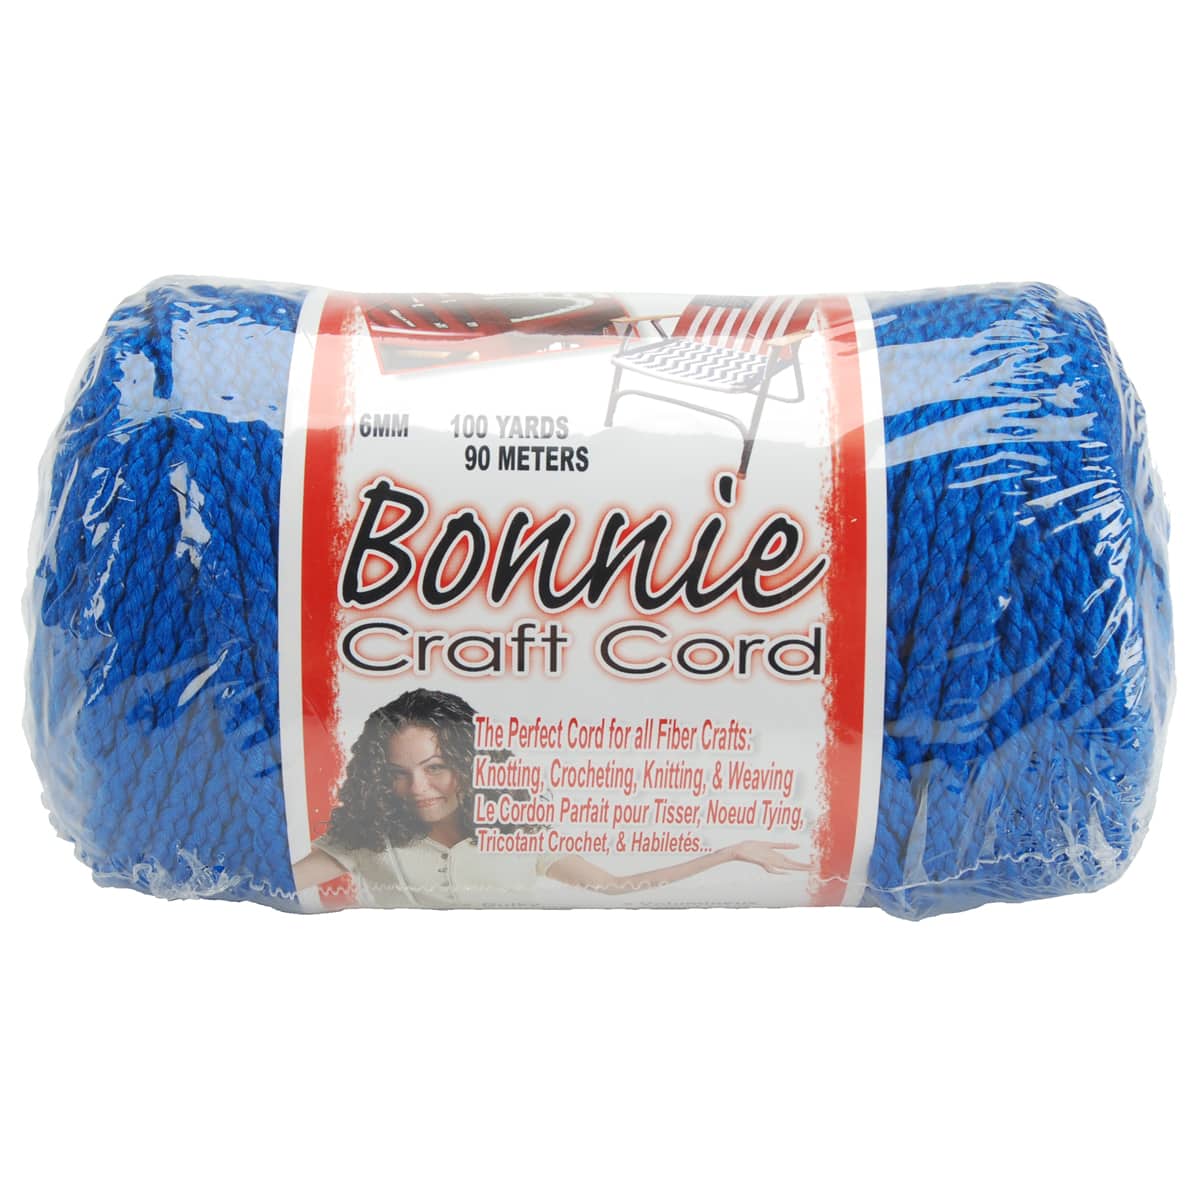 6mm Bonnie craft cord – Reverie Crafting